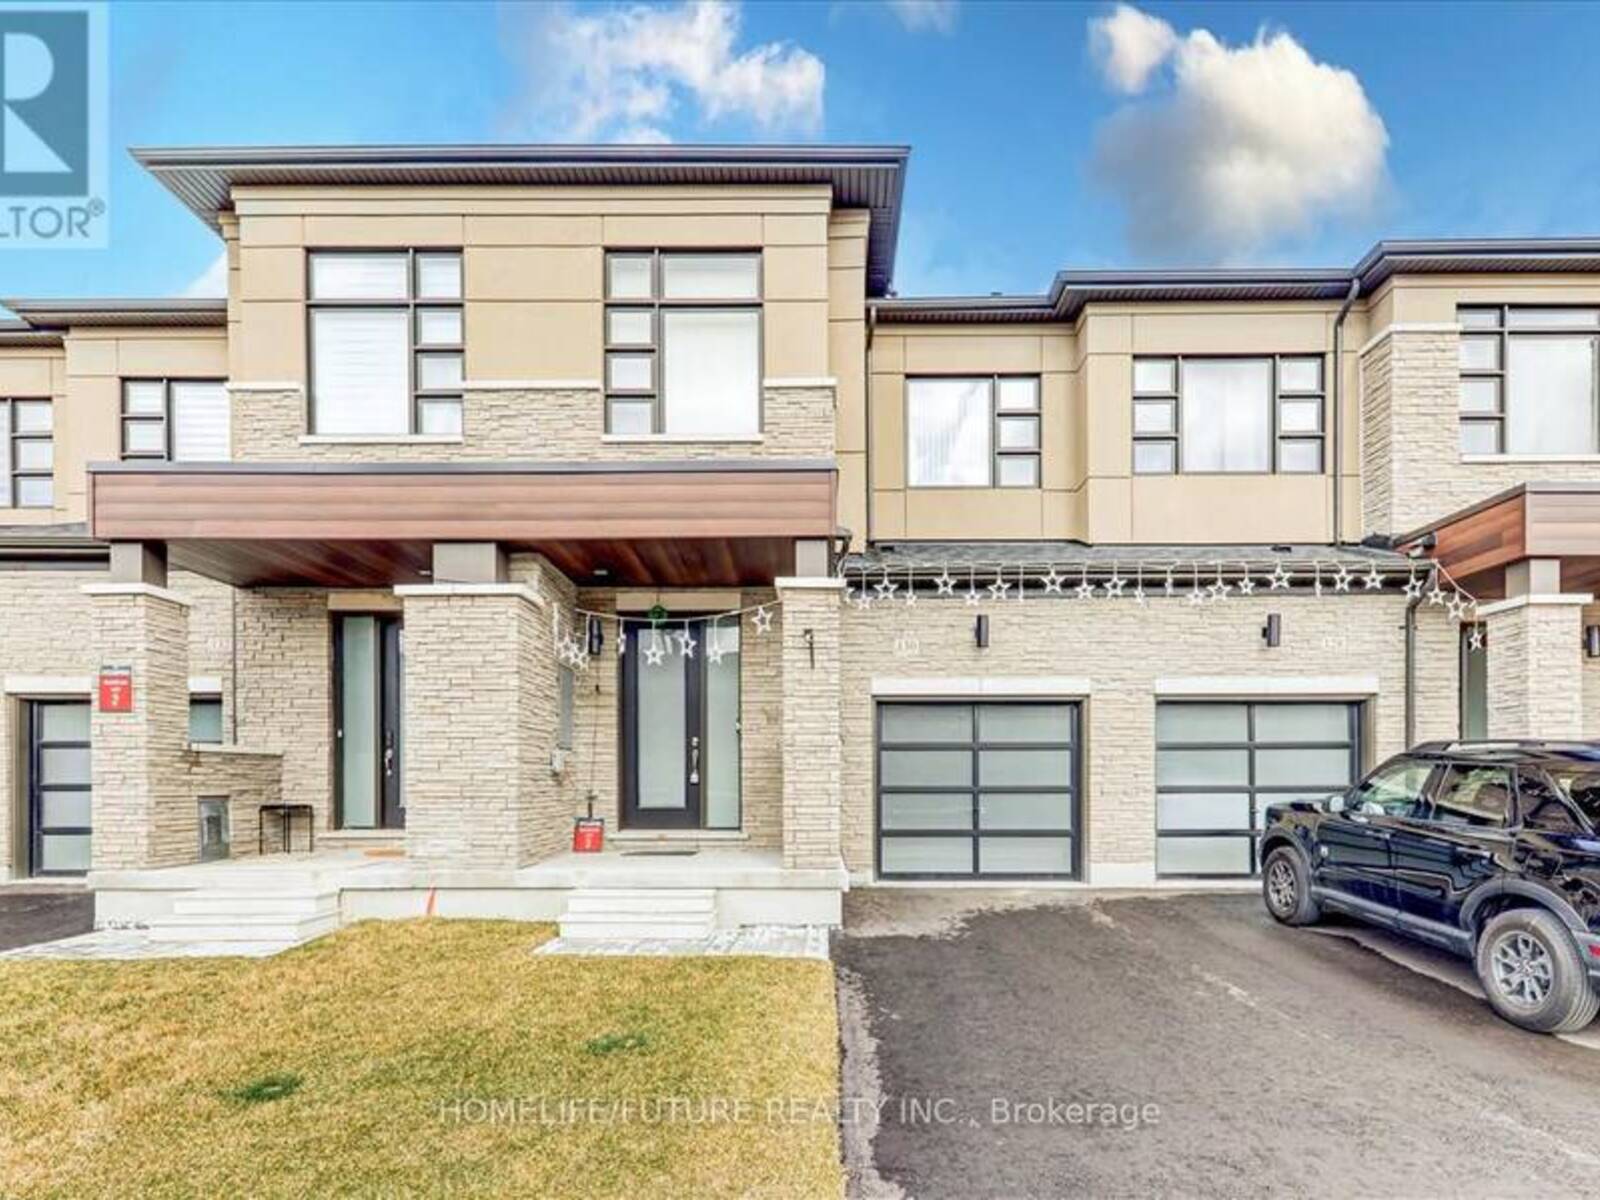 130 OGSTON CRESCENT, Whitby, Ontario L1P 0H3